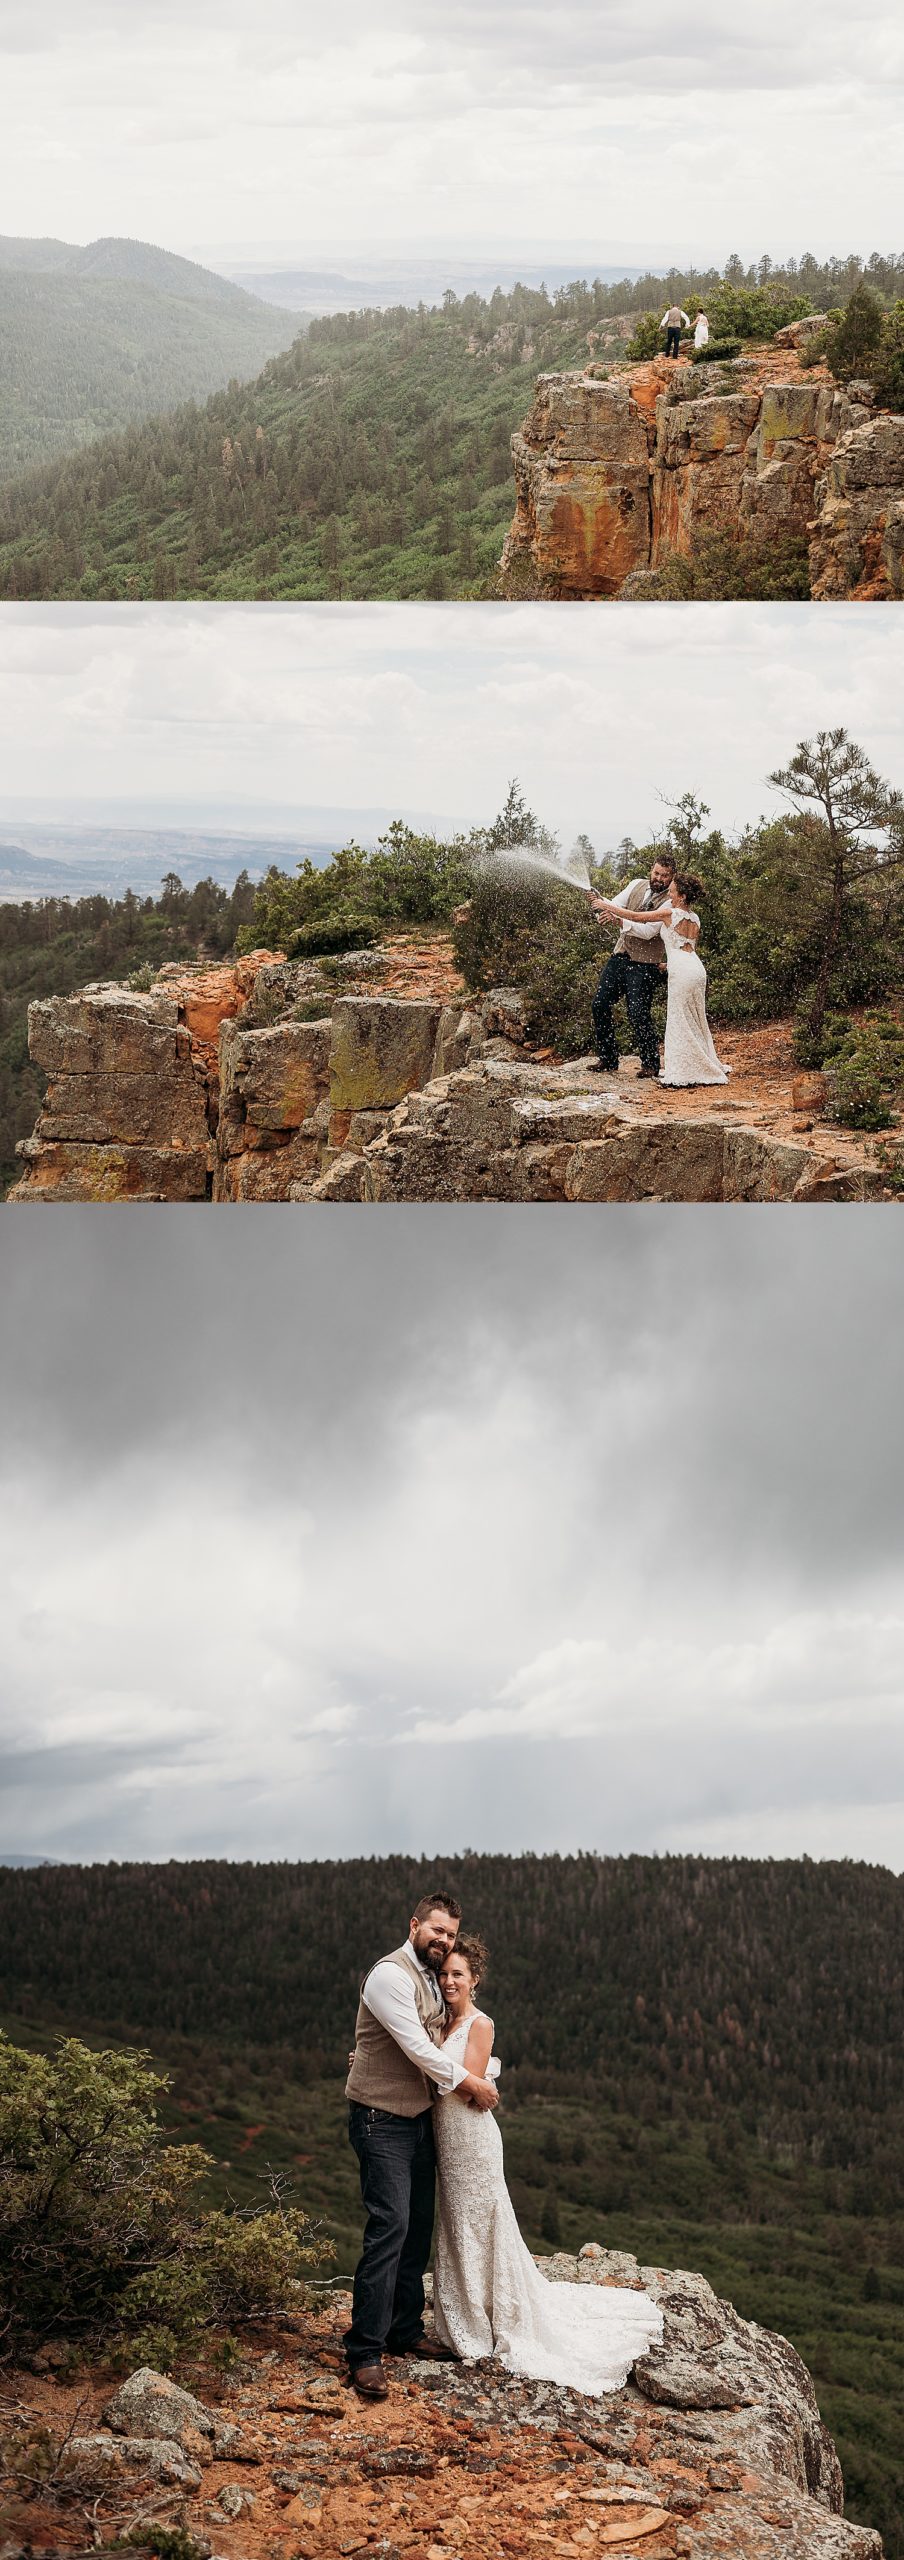 standing on a mountain at sunset on wedding day in New Mexico